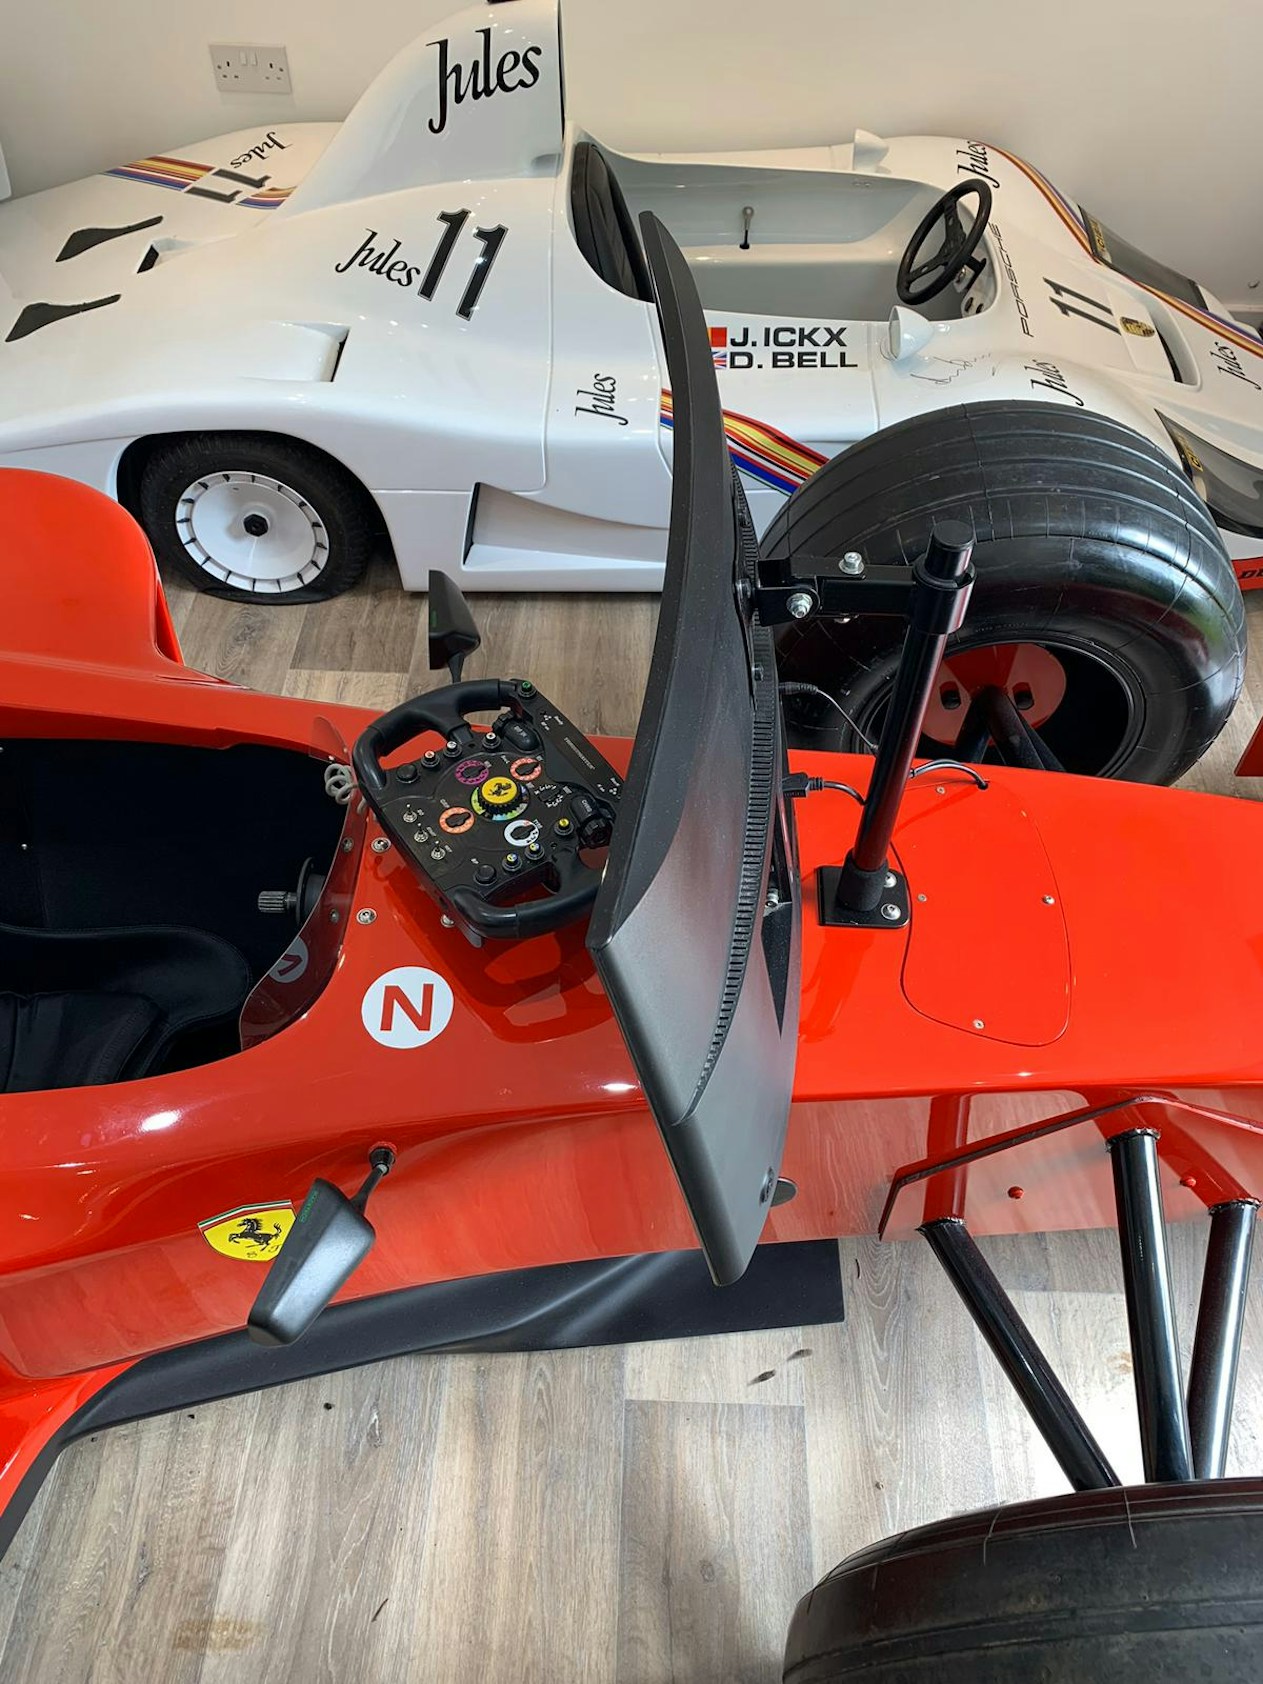 FERRARI F1 PS4 STATIC RACING SIMULATOR for sale by auction in , United  Kingdom